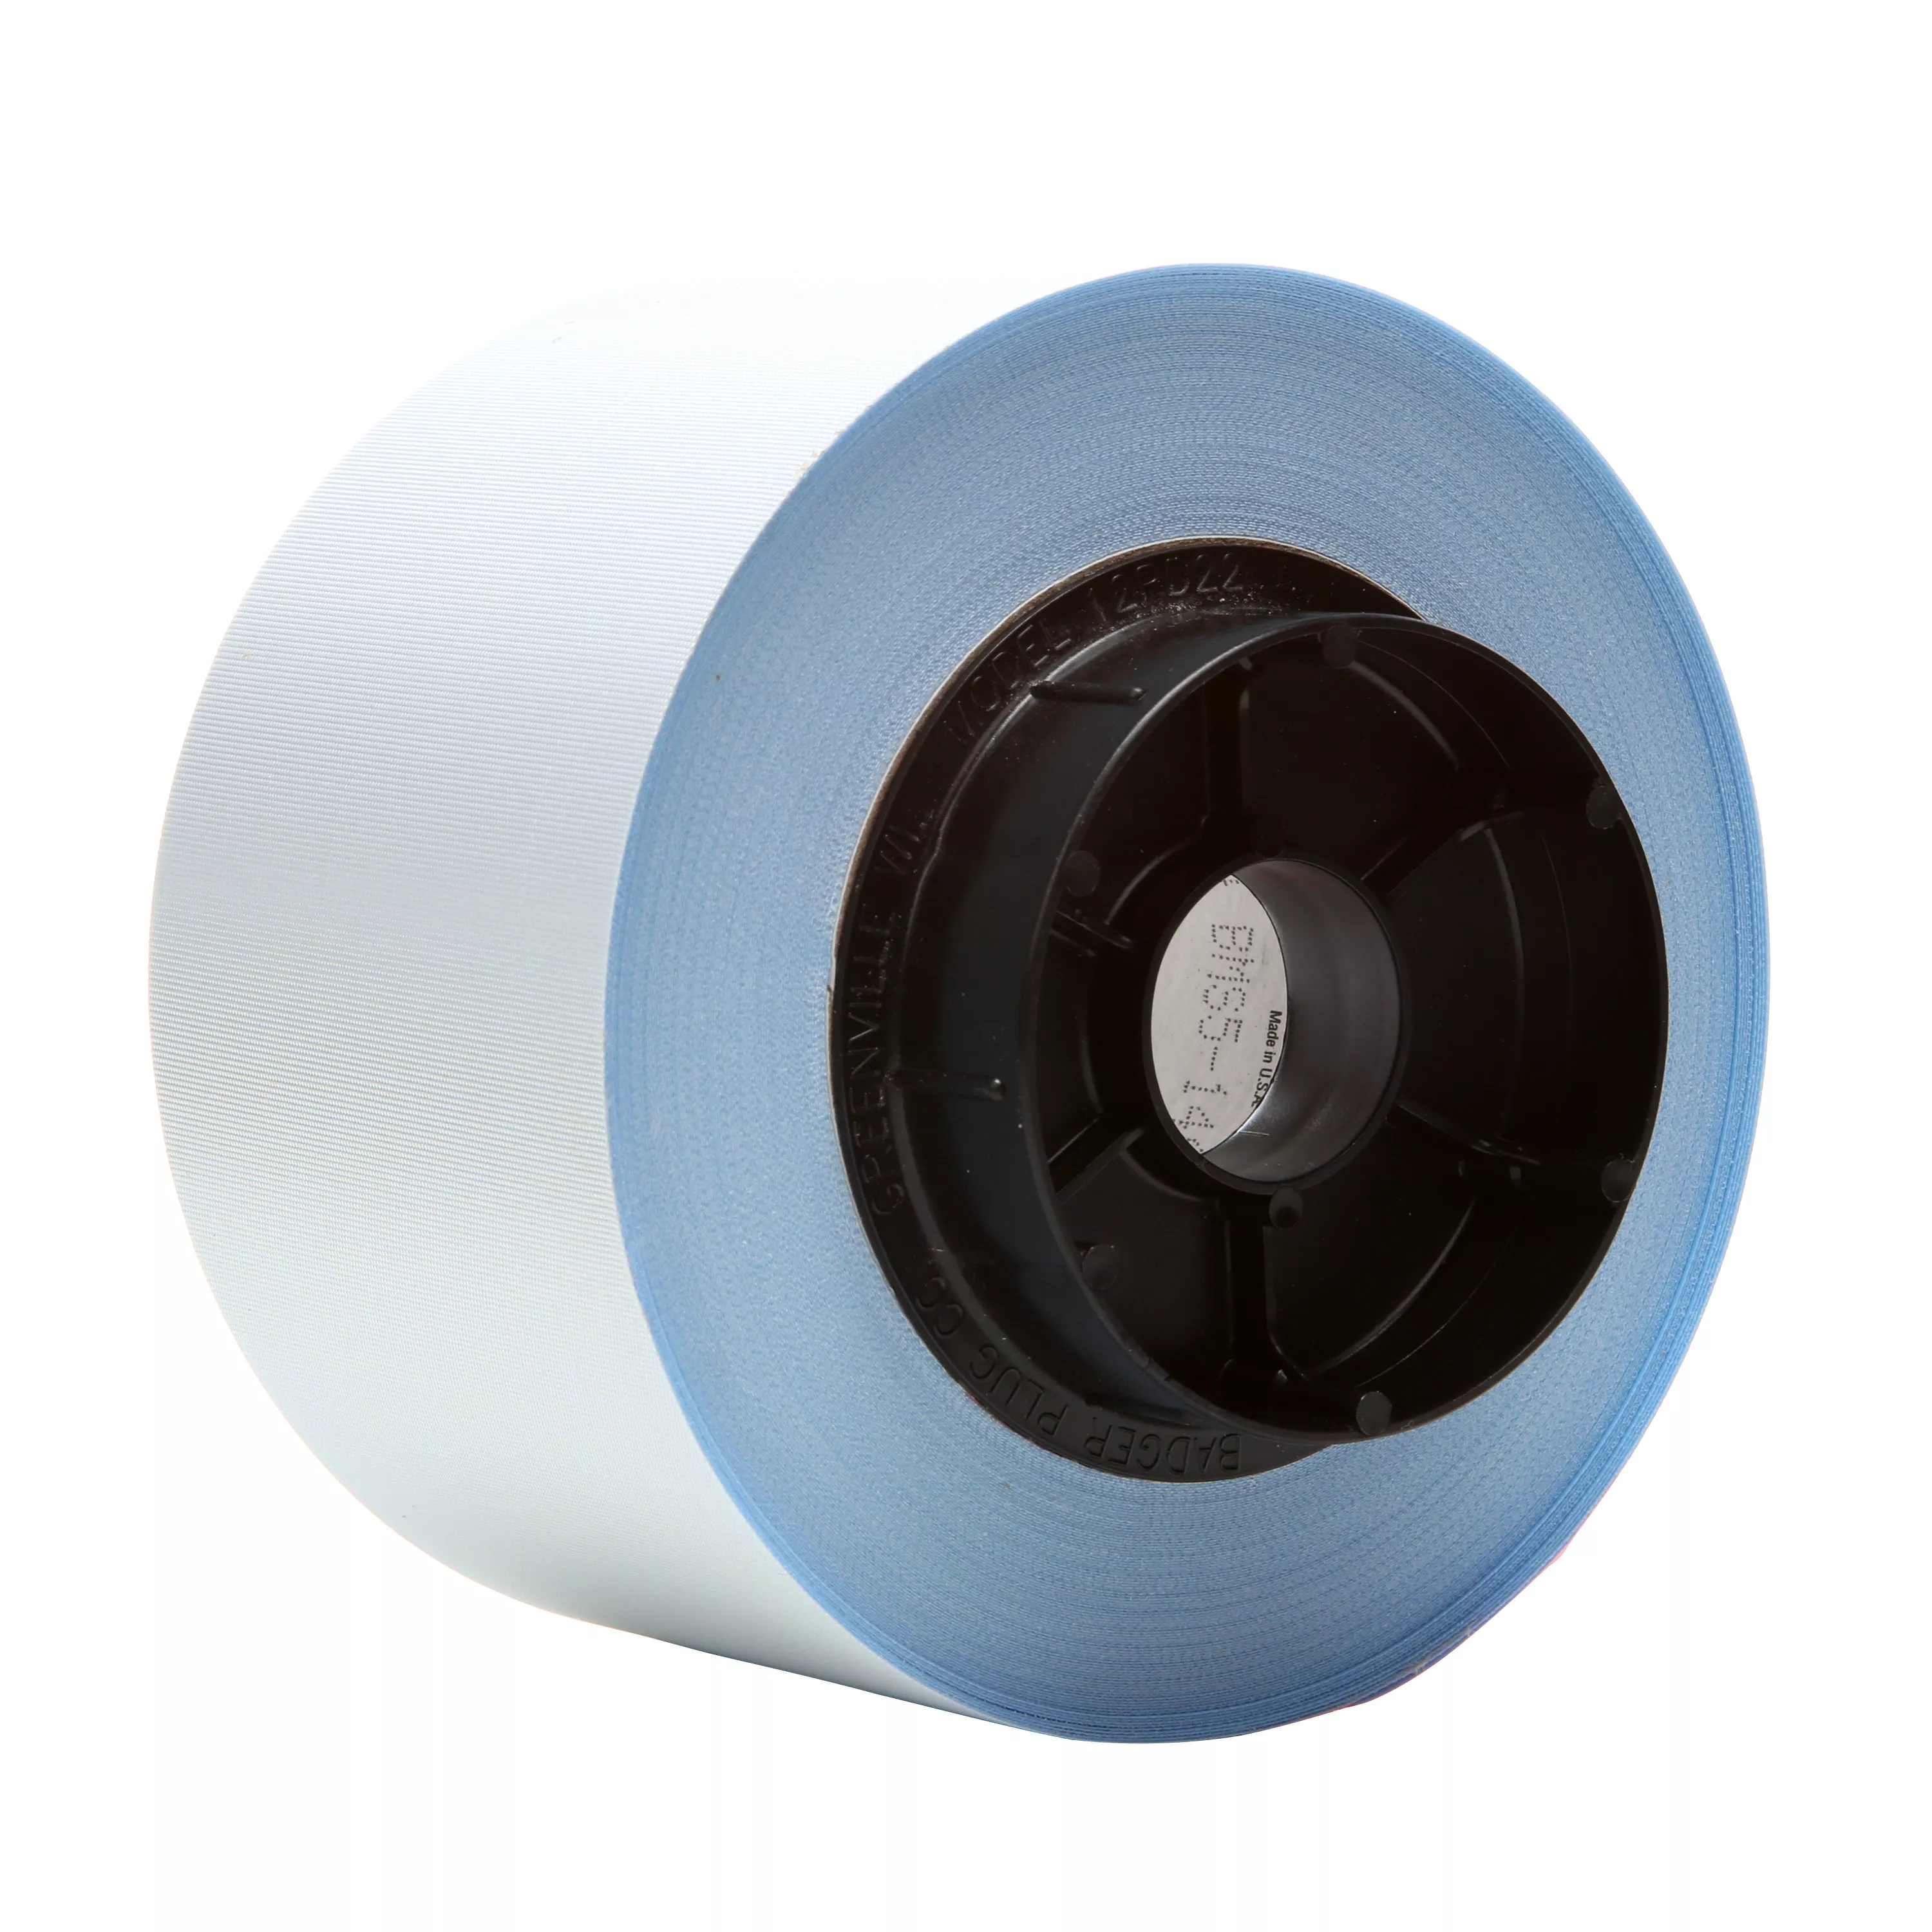 3M™ Glass Cloth Tape 398FR, White, 3 in x 36 yd, 7 mil, 12 Roll/Case